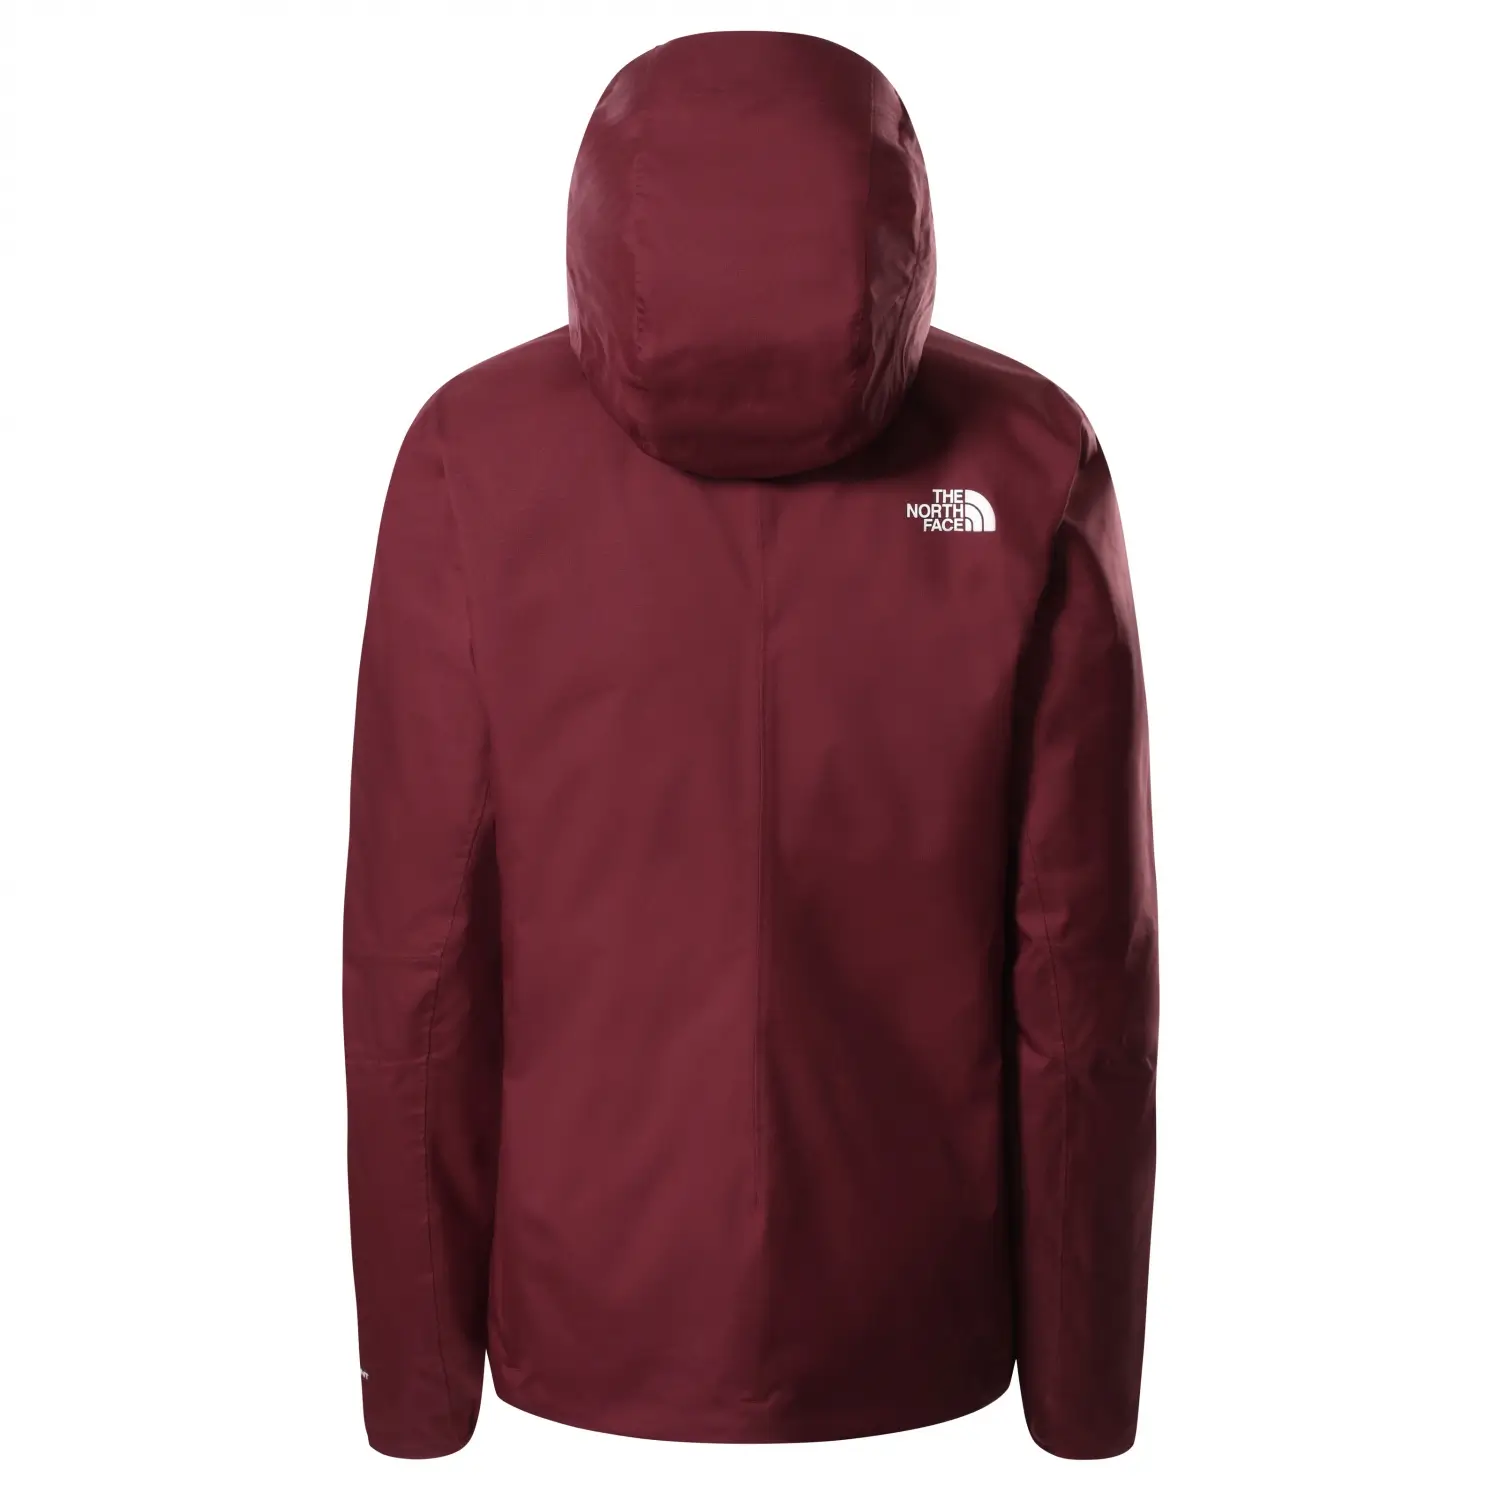 The North Face Quest Insulated Bordo Kadın Mont - NF0A3Y1JD4S1